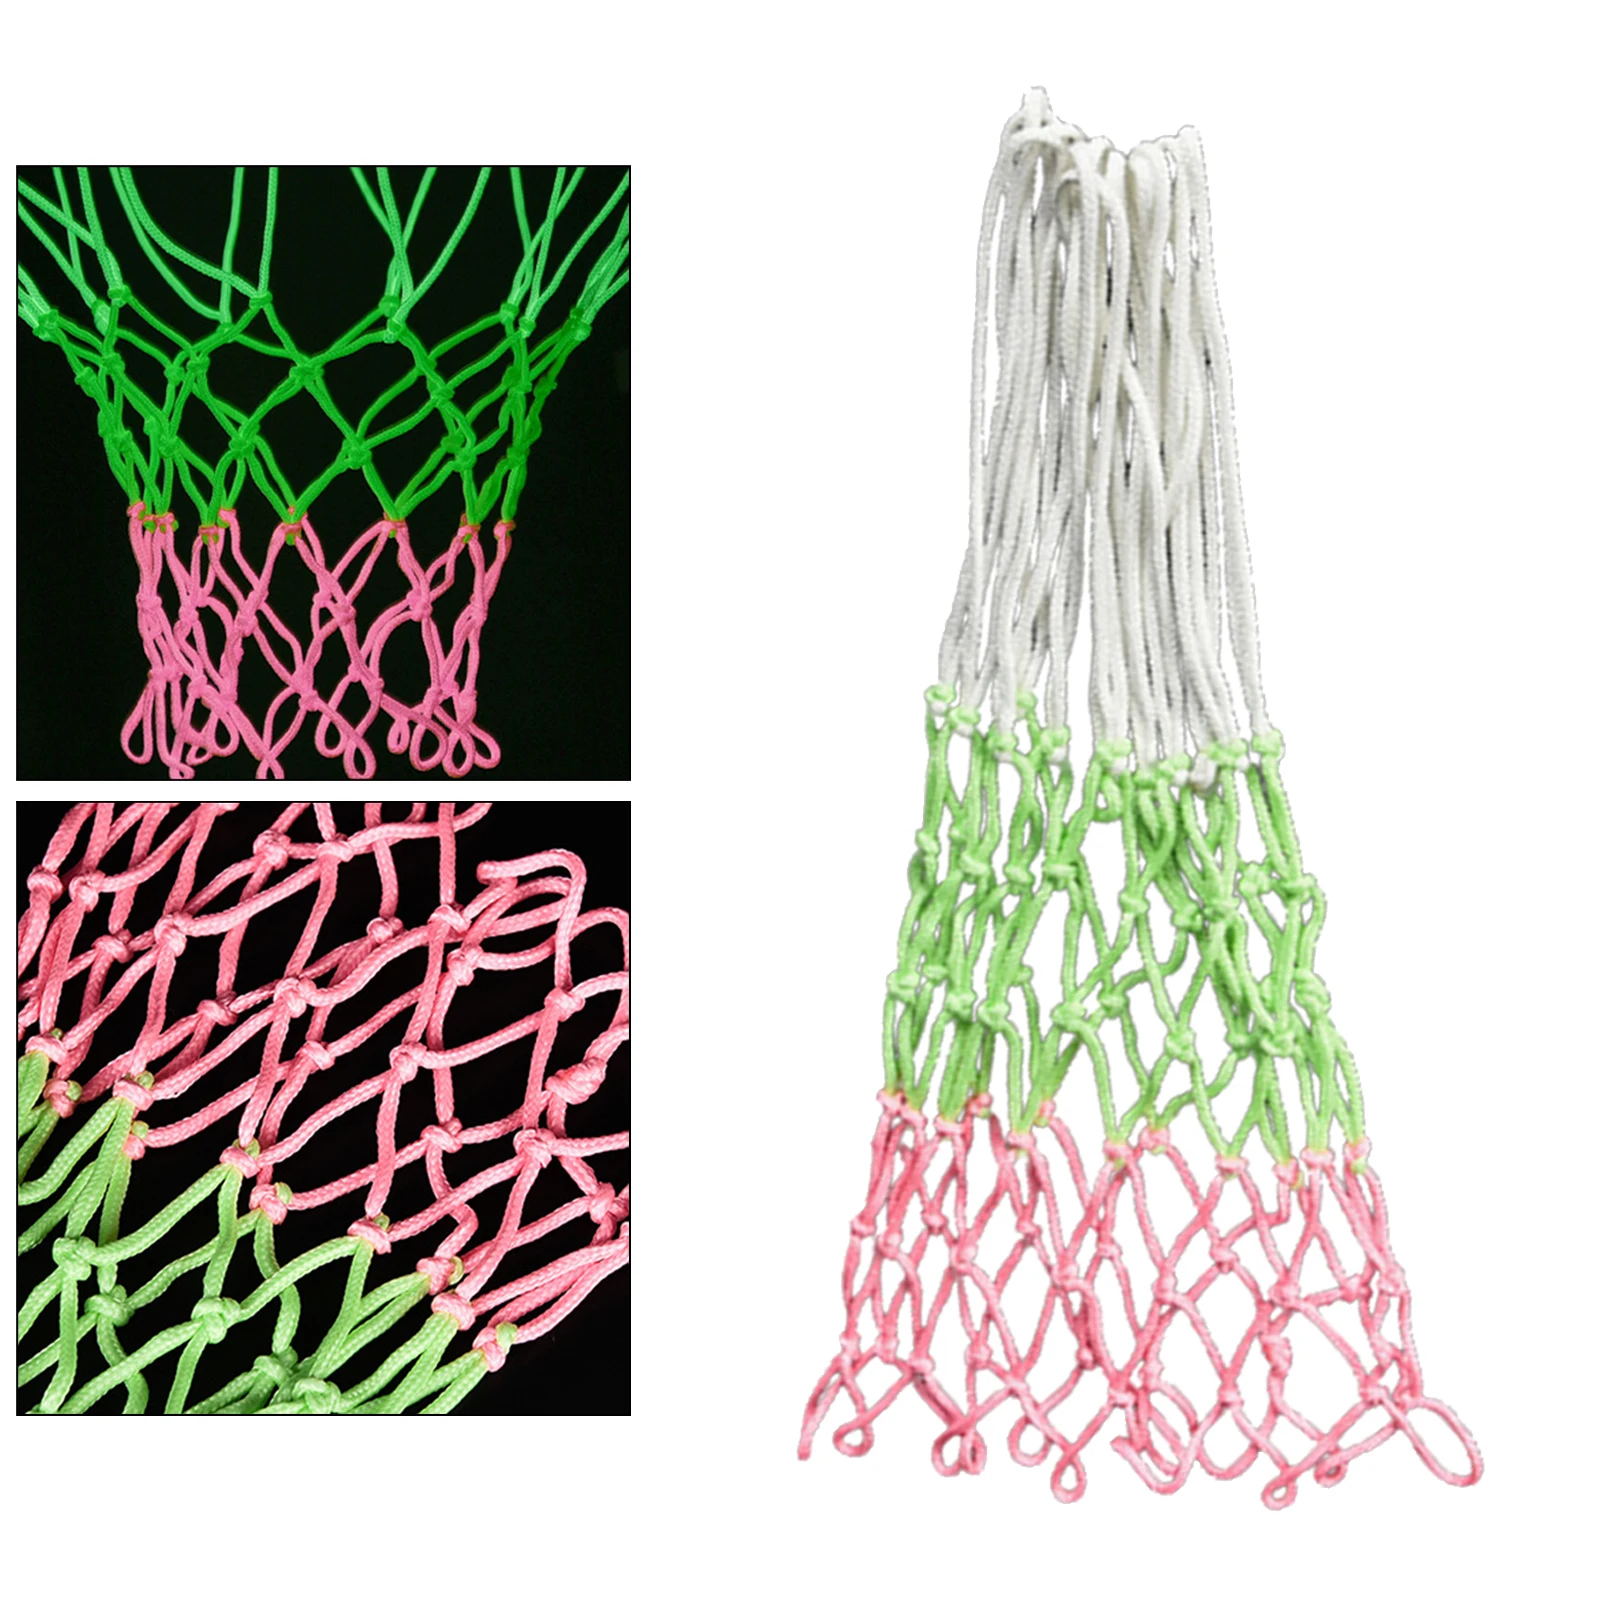 Durable Basketball Hoop Net Replacement Standard Glow In the Dark Basketball Portable Mesh Netting Accessories